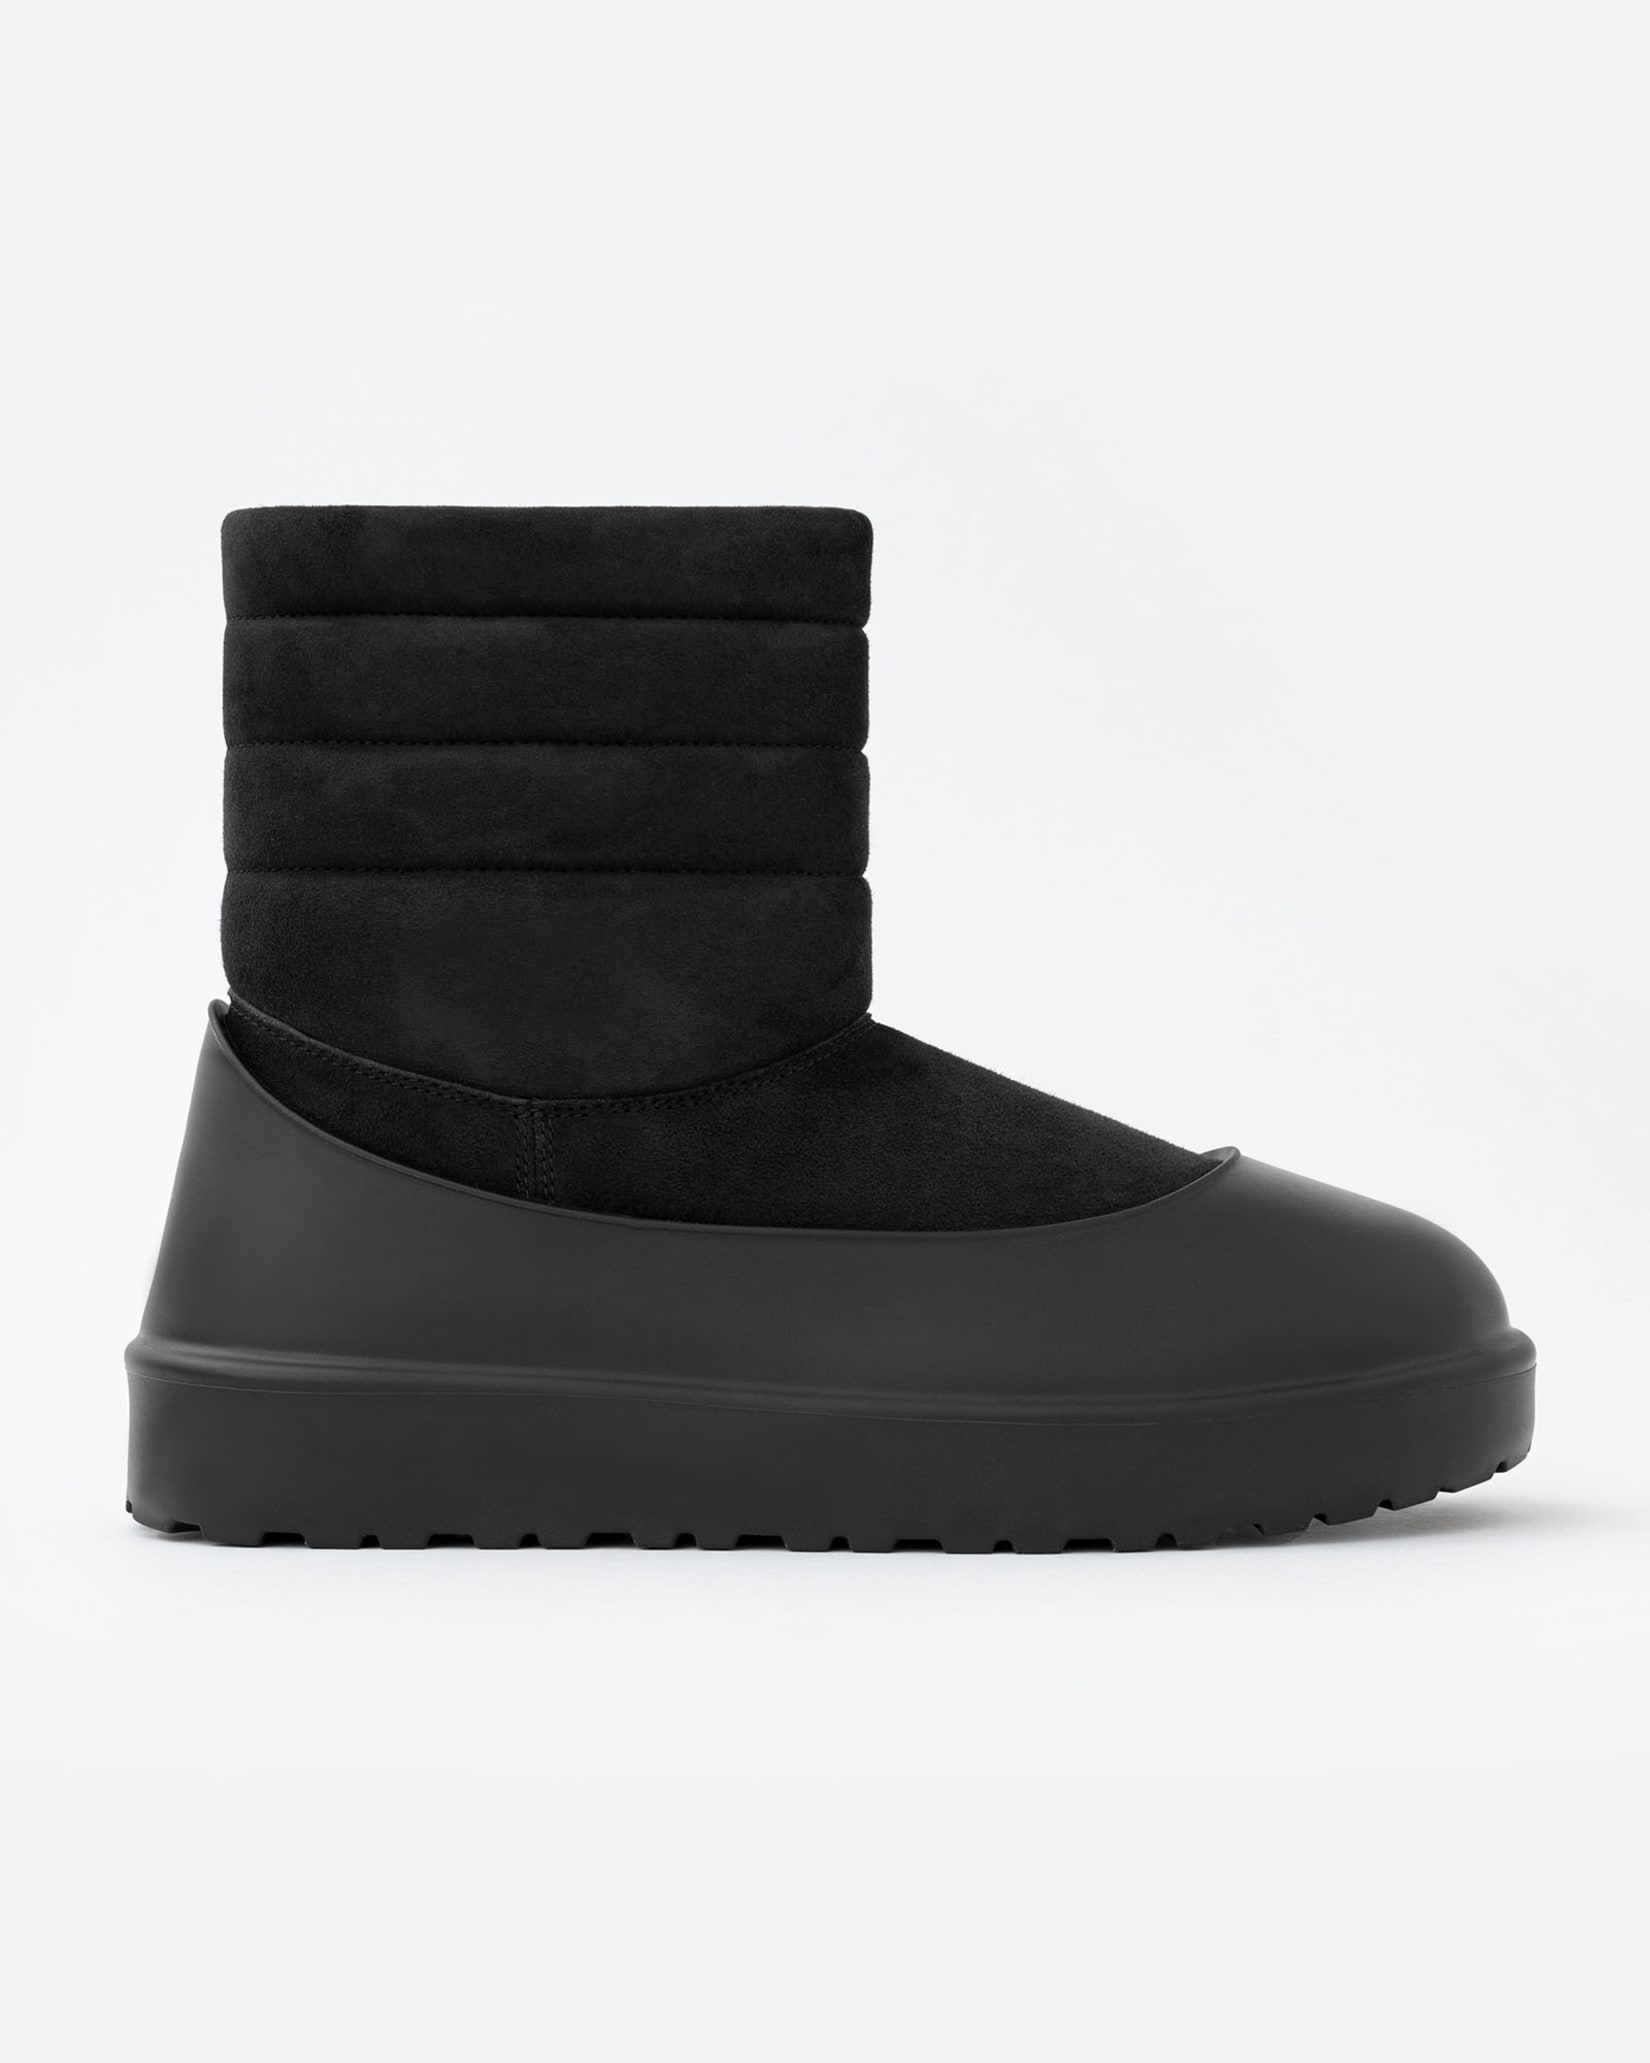 ugg×STAMPD コラボ 定価42000+tax | camillevieraservices.com